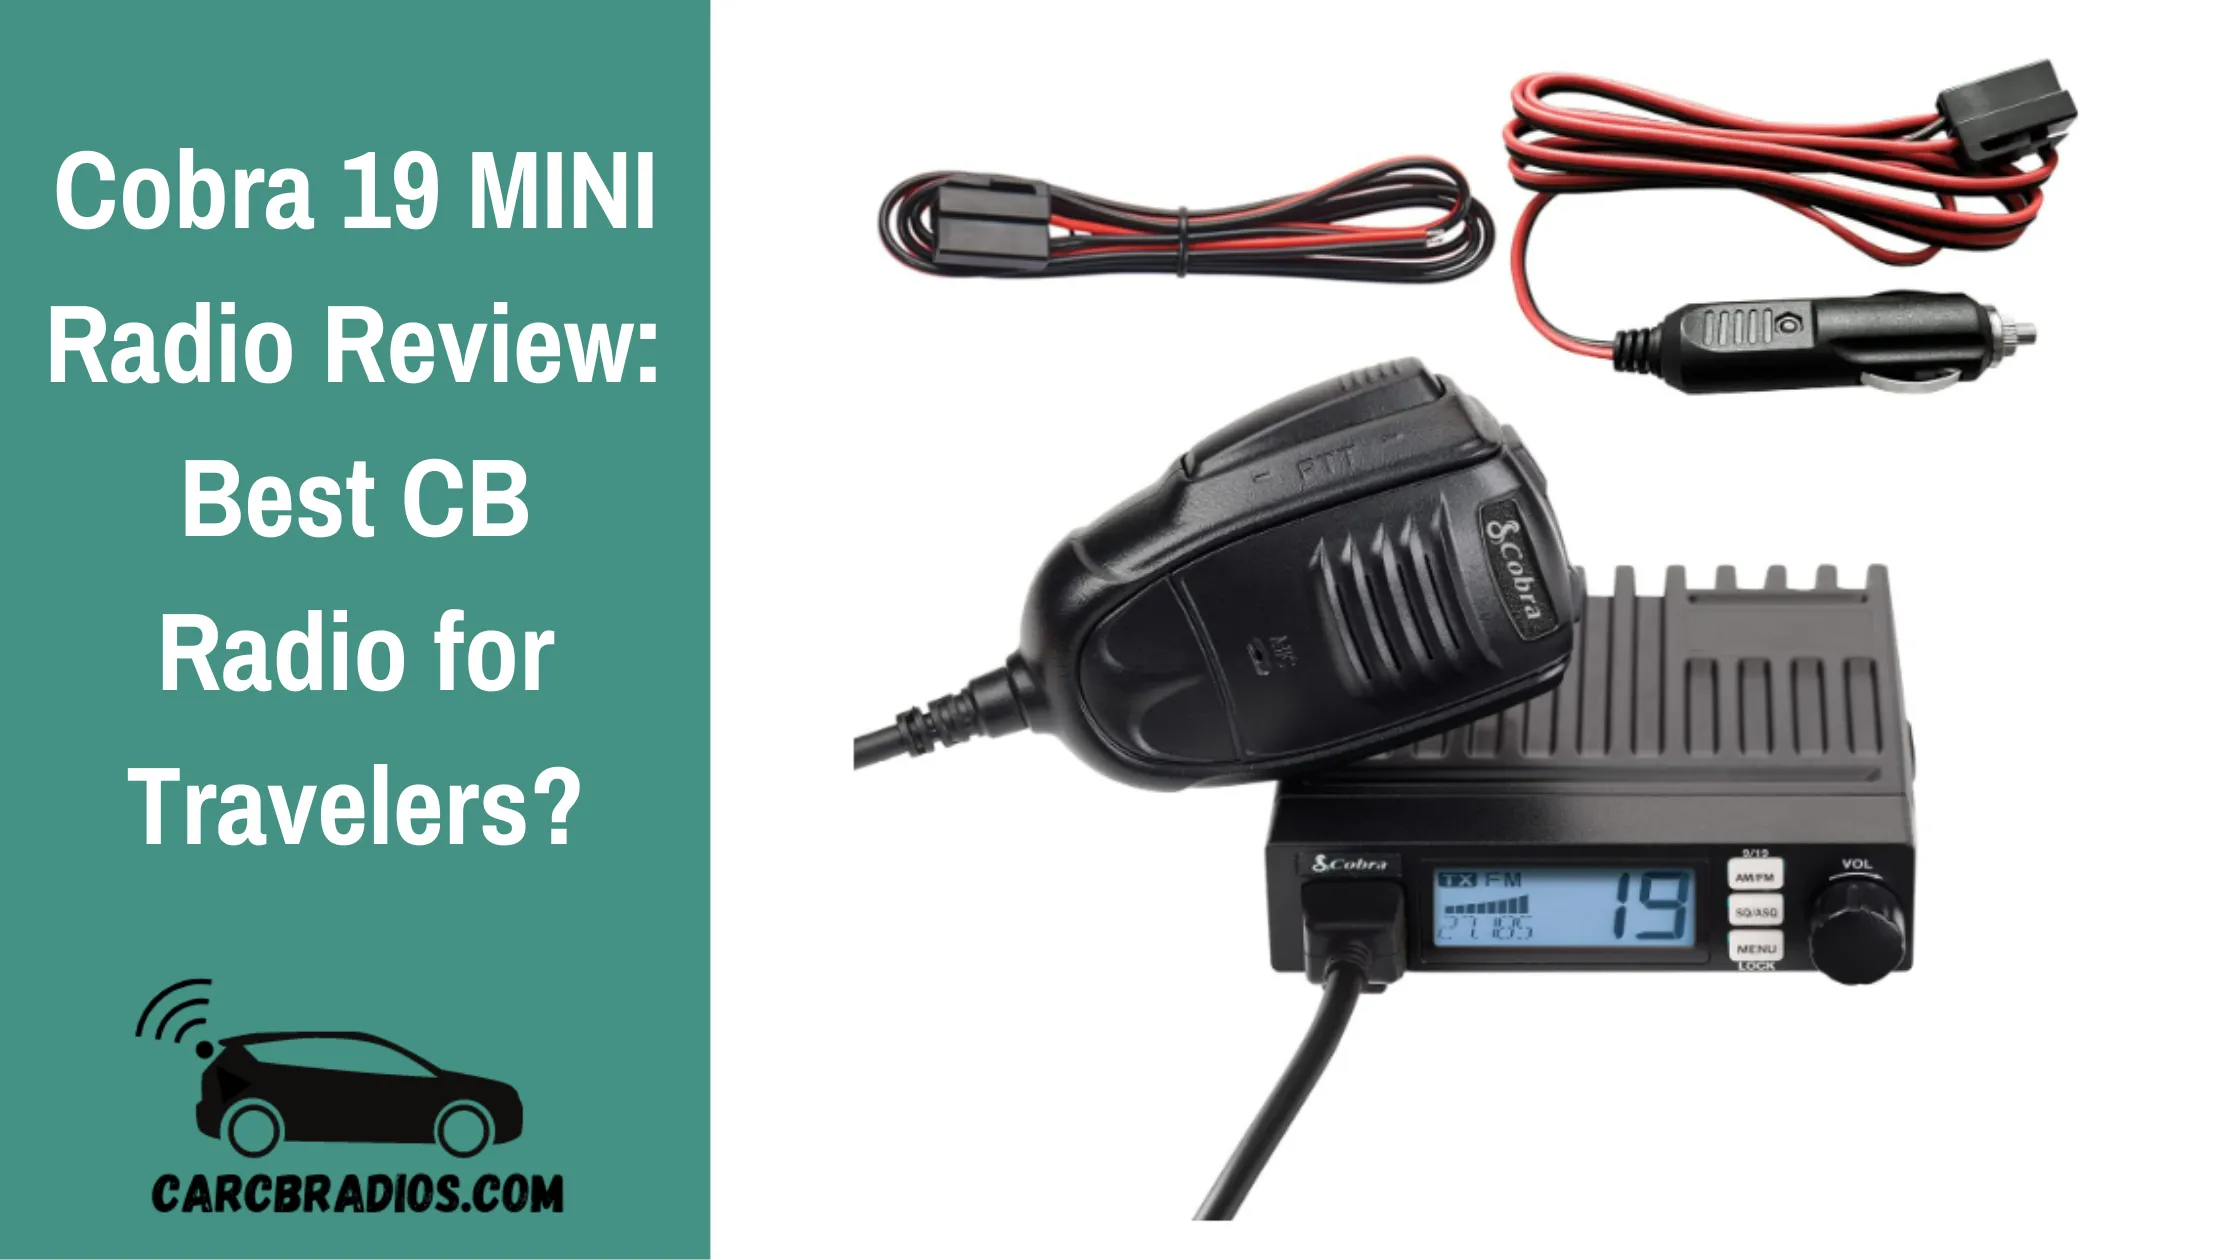 If you're in need of a compact and reliable CB radio for your next adventure, the Cobra 19 MINI Recreational CB Radio is an excellent choice. Its clear communication, easy operation, and hands-free usage make it a standout option.